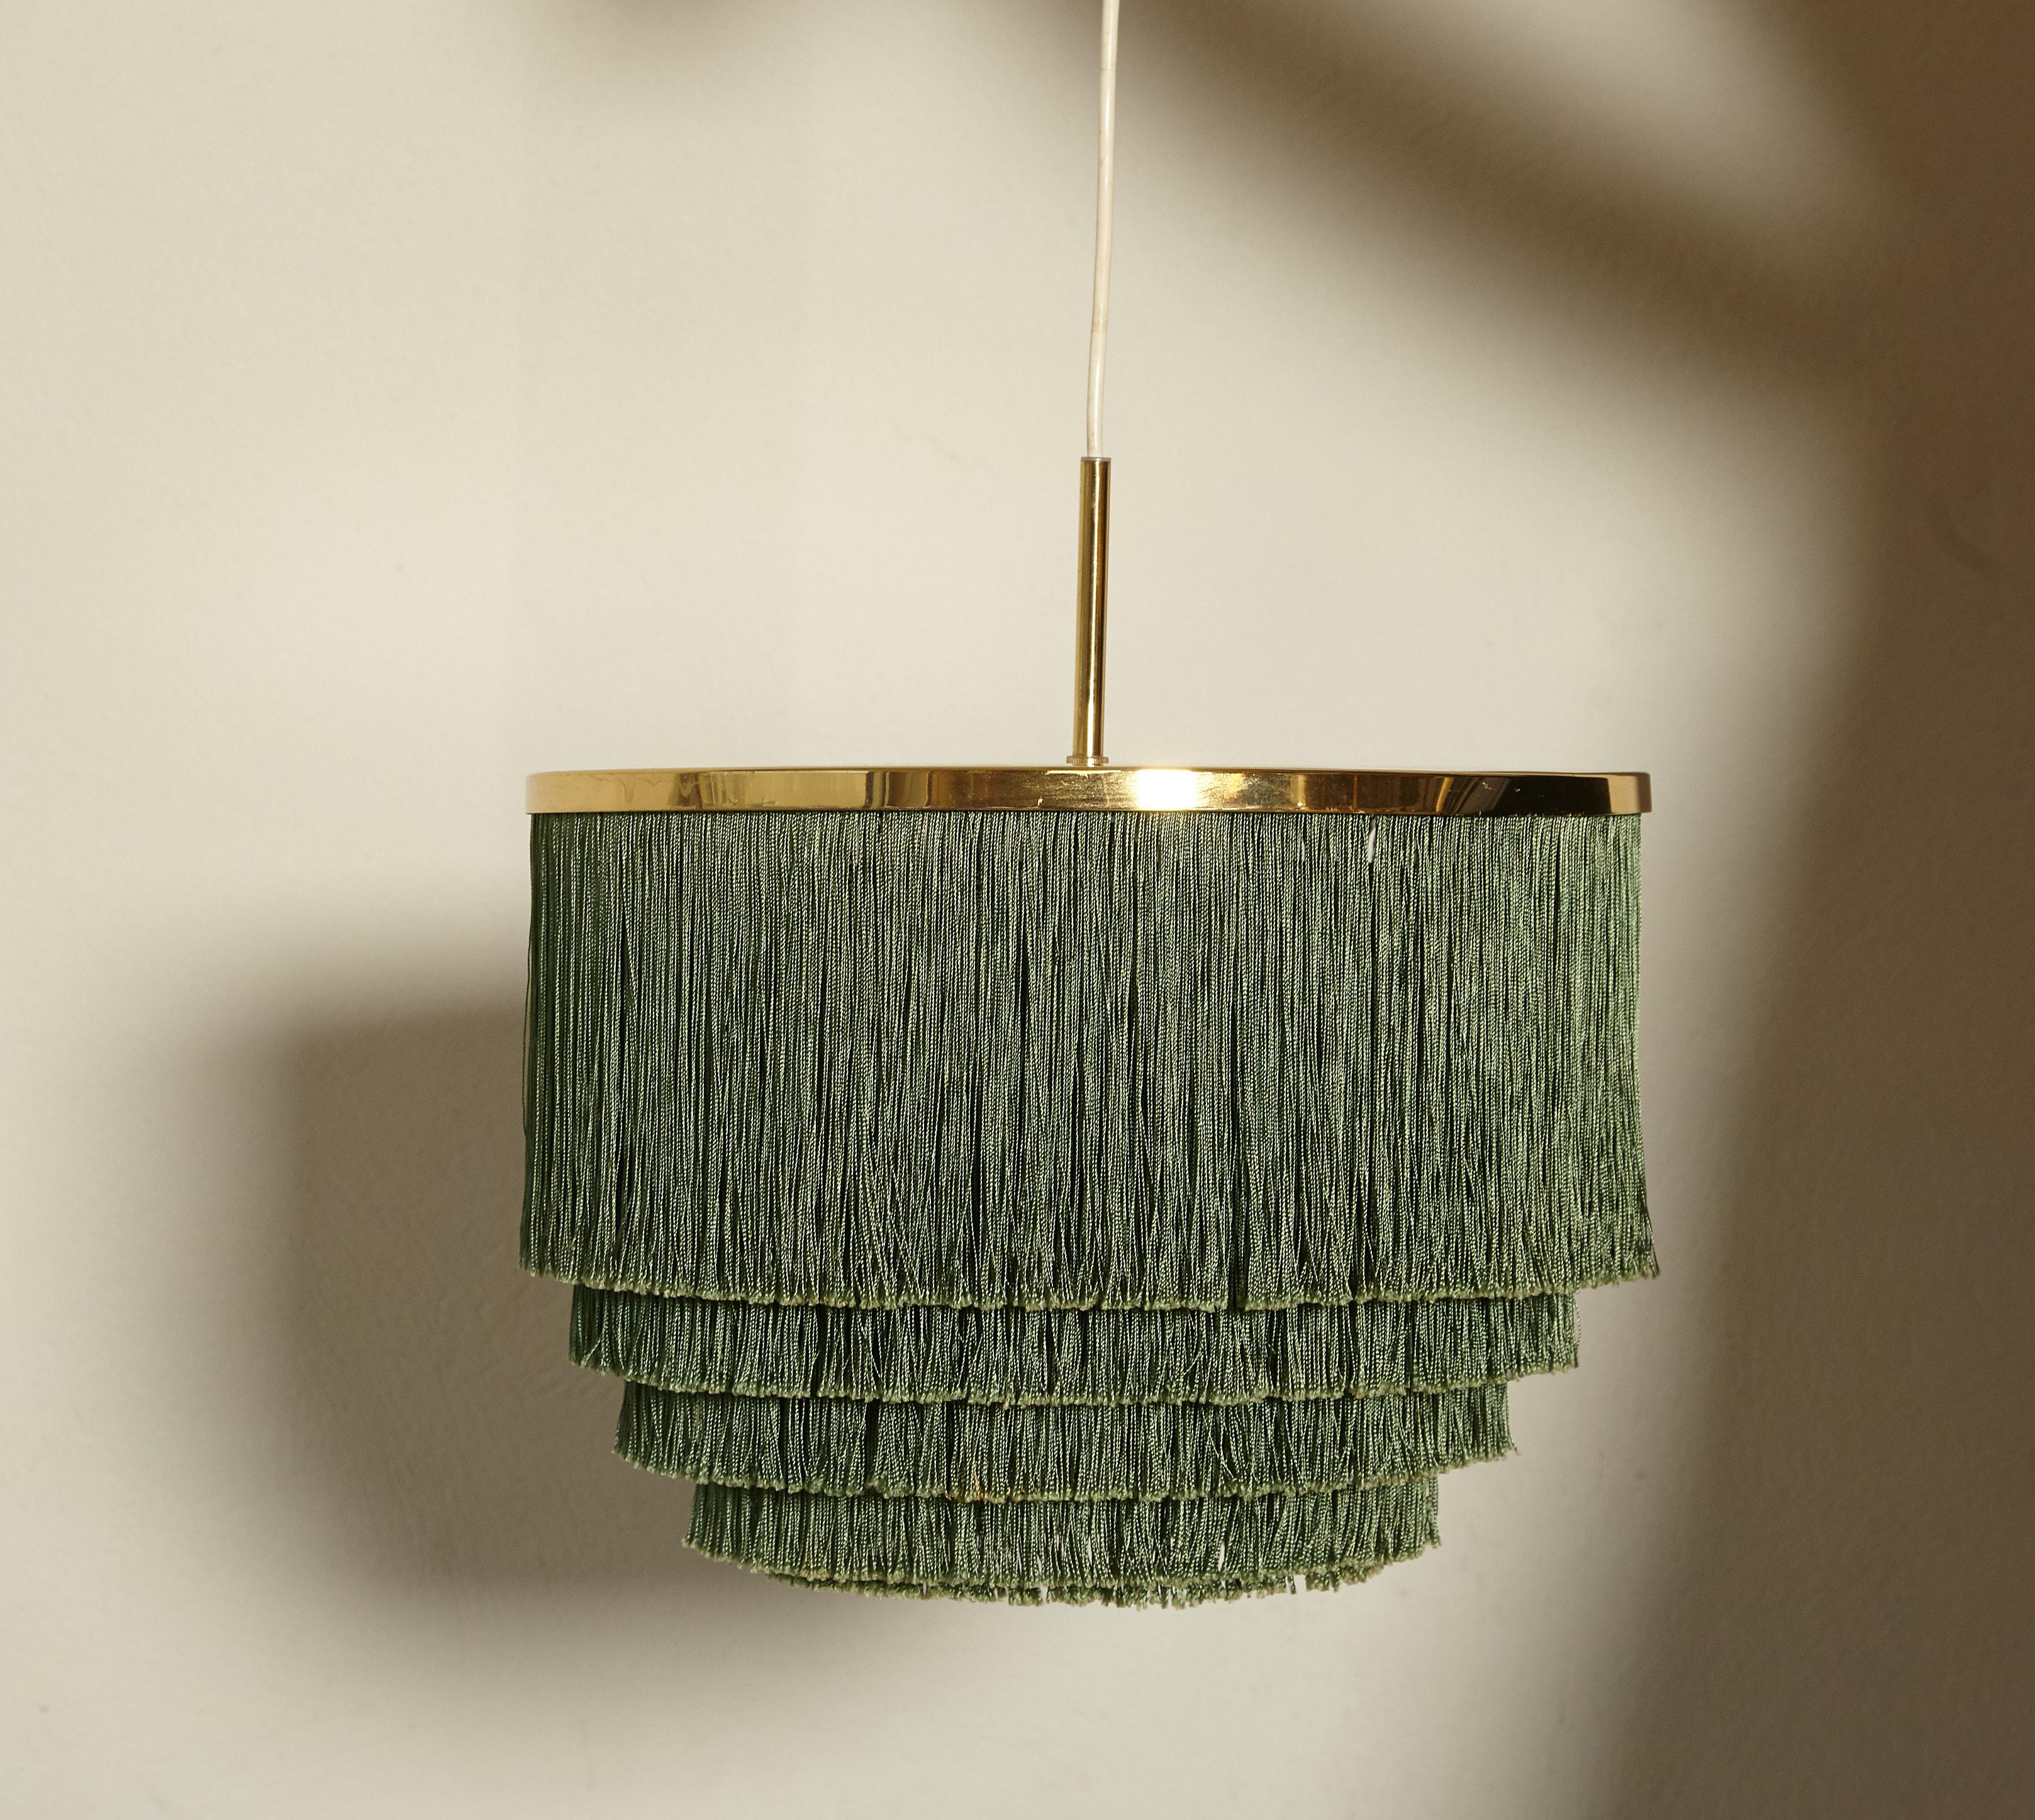 Hans-Agne Jakobsson brass and green silk fringed pendant lamp, Sweden, 1960s. Very good original condition, and a fantastic rare color. Produced by his own company Markaryd in Sweden. With original ceiling mount in brass.